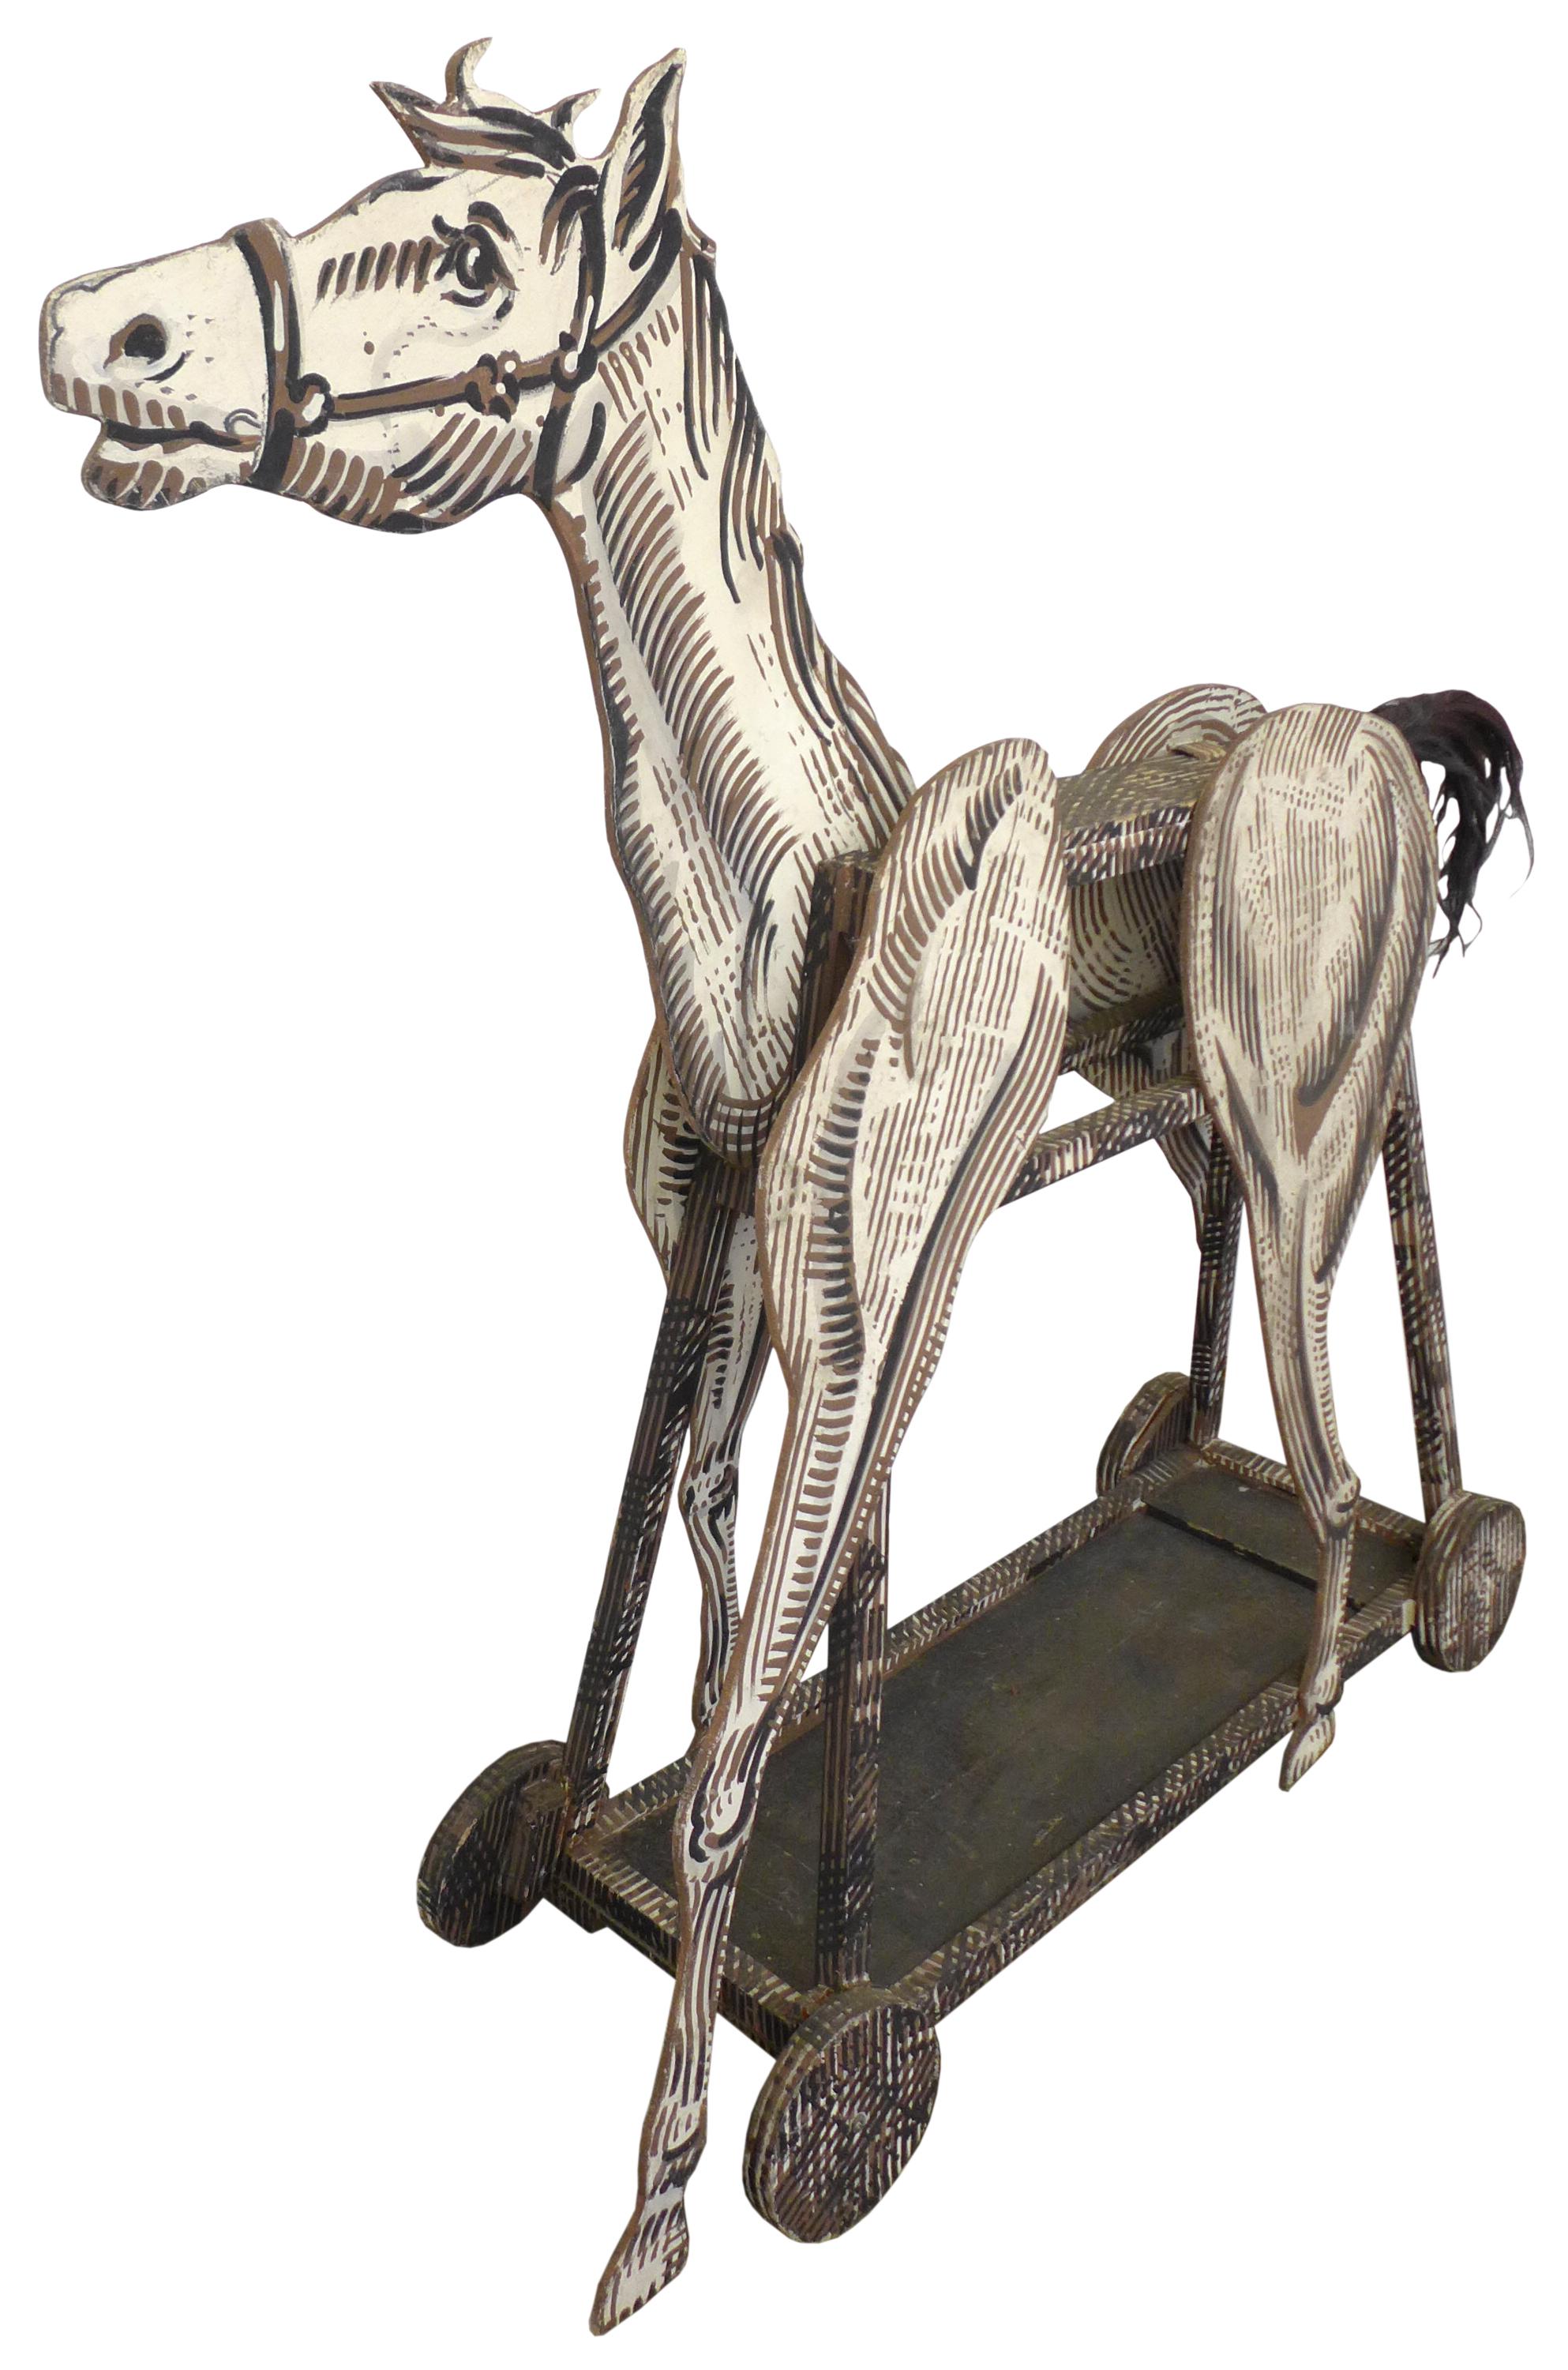 An incredible, unusual, hand-painted-wood horse sculpture. A semi-knock-down construction, six plywood appendages, including a tail of real horse hair, attach to the central rolling cart 